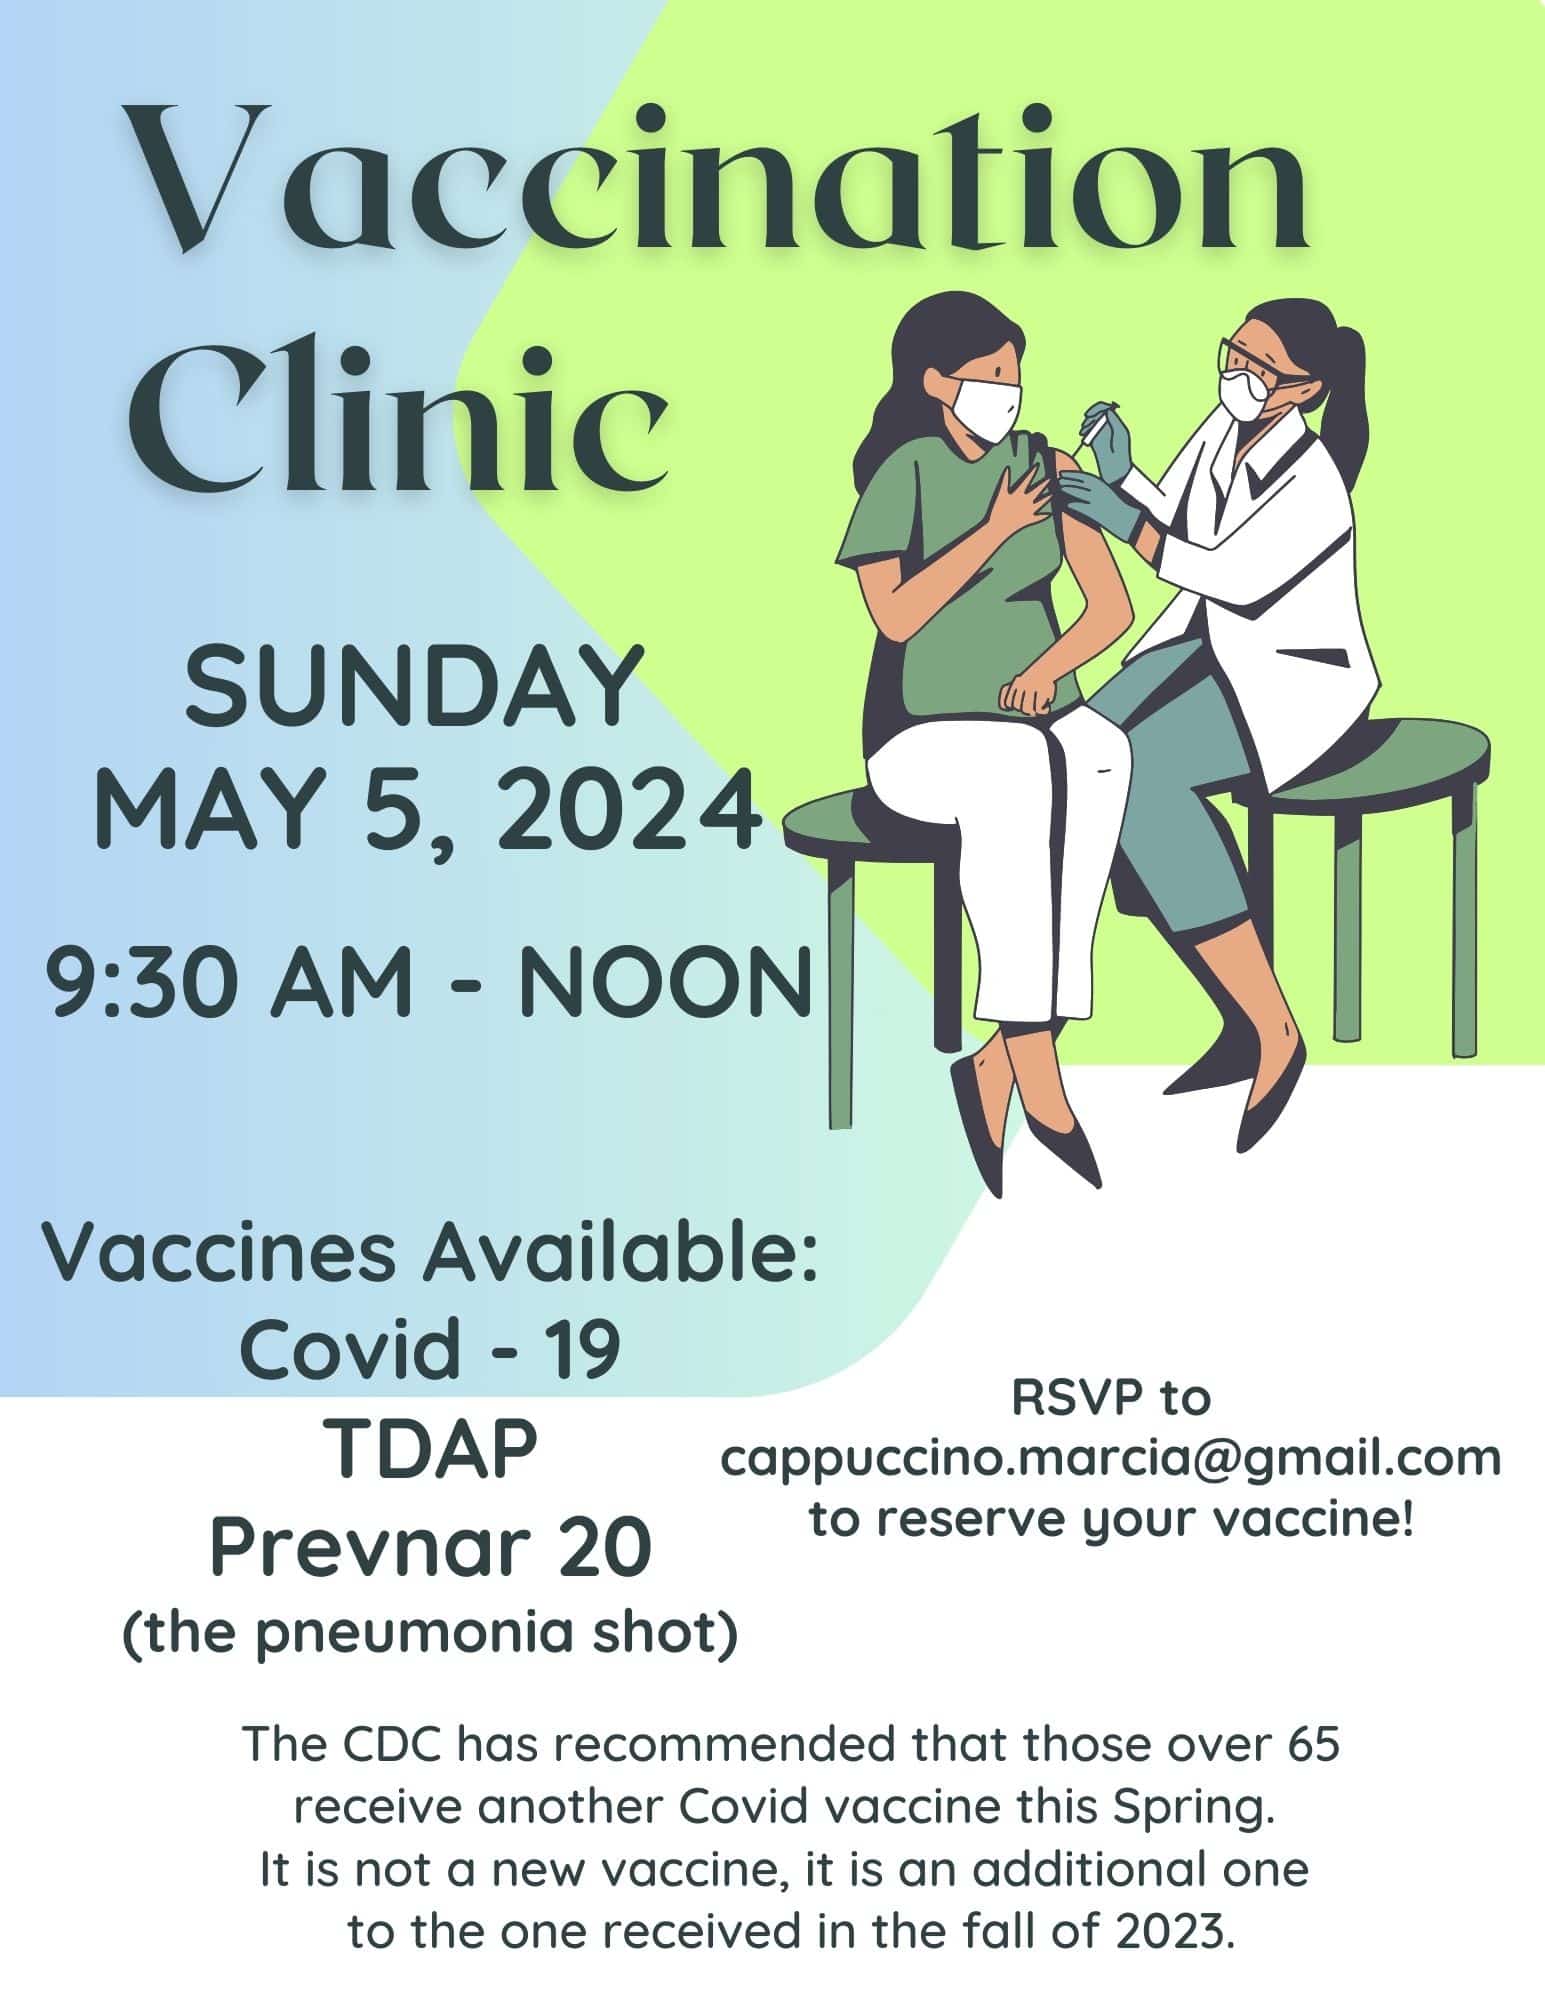 TBT Vaccination Clinic - Vaccination Clinic 2